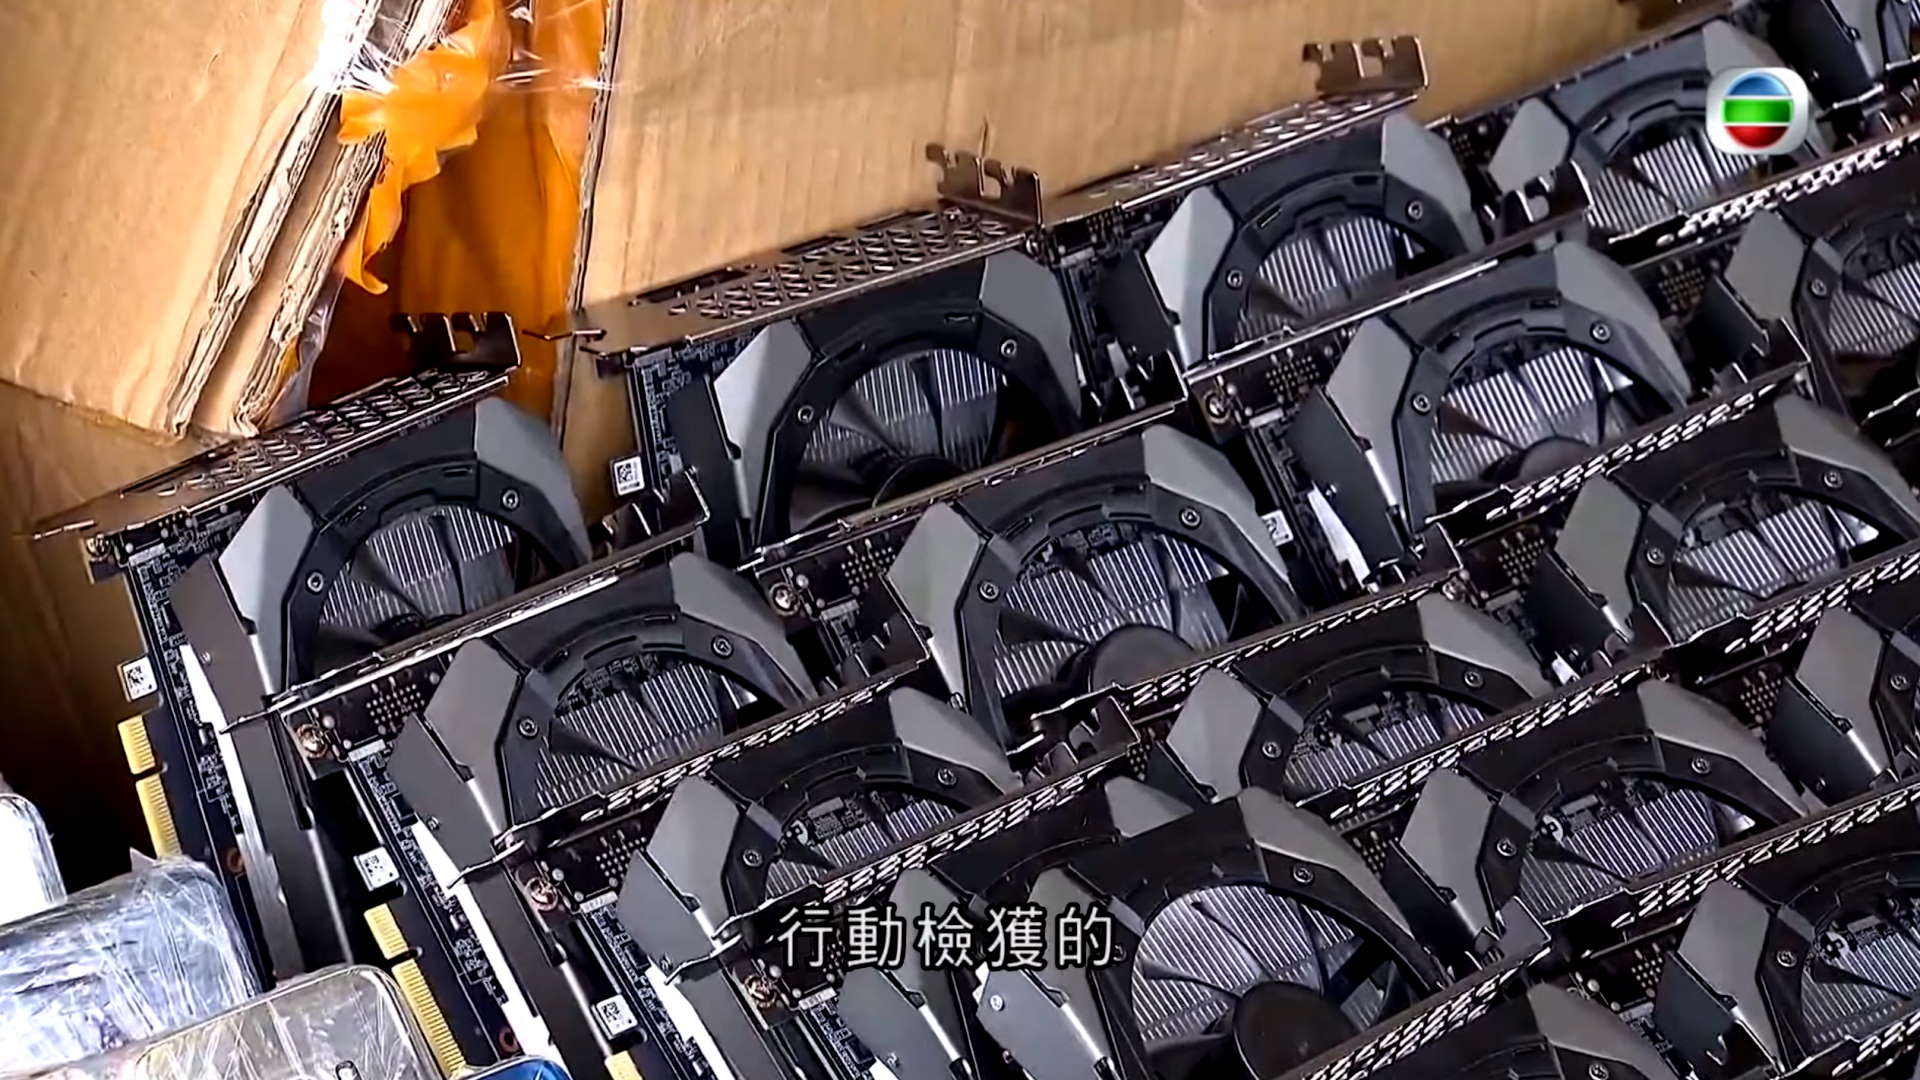  So, actual graphics card smugglers are now a thing then 